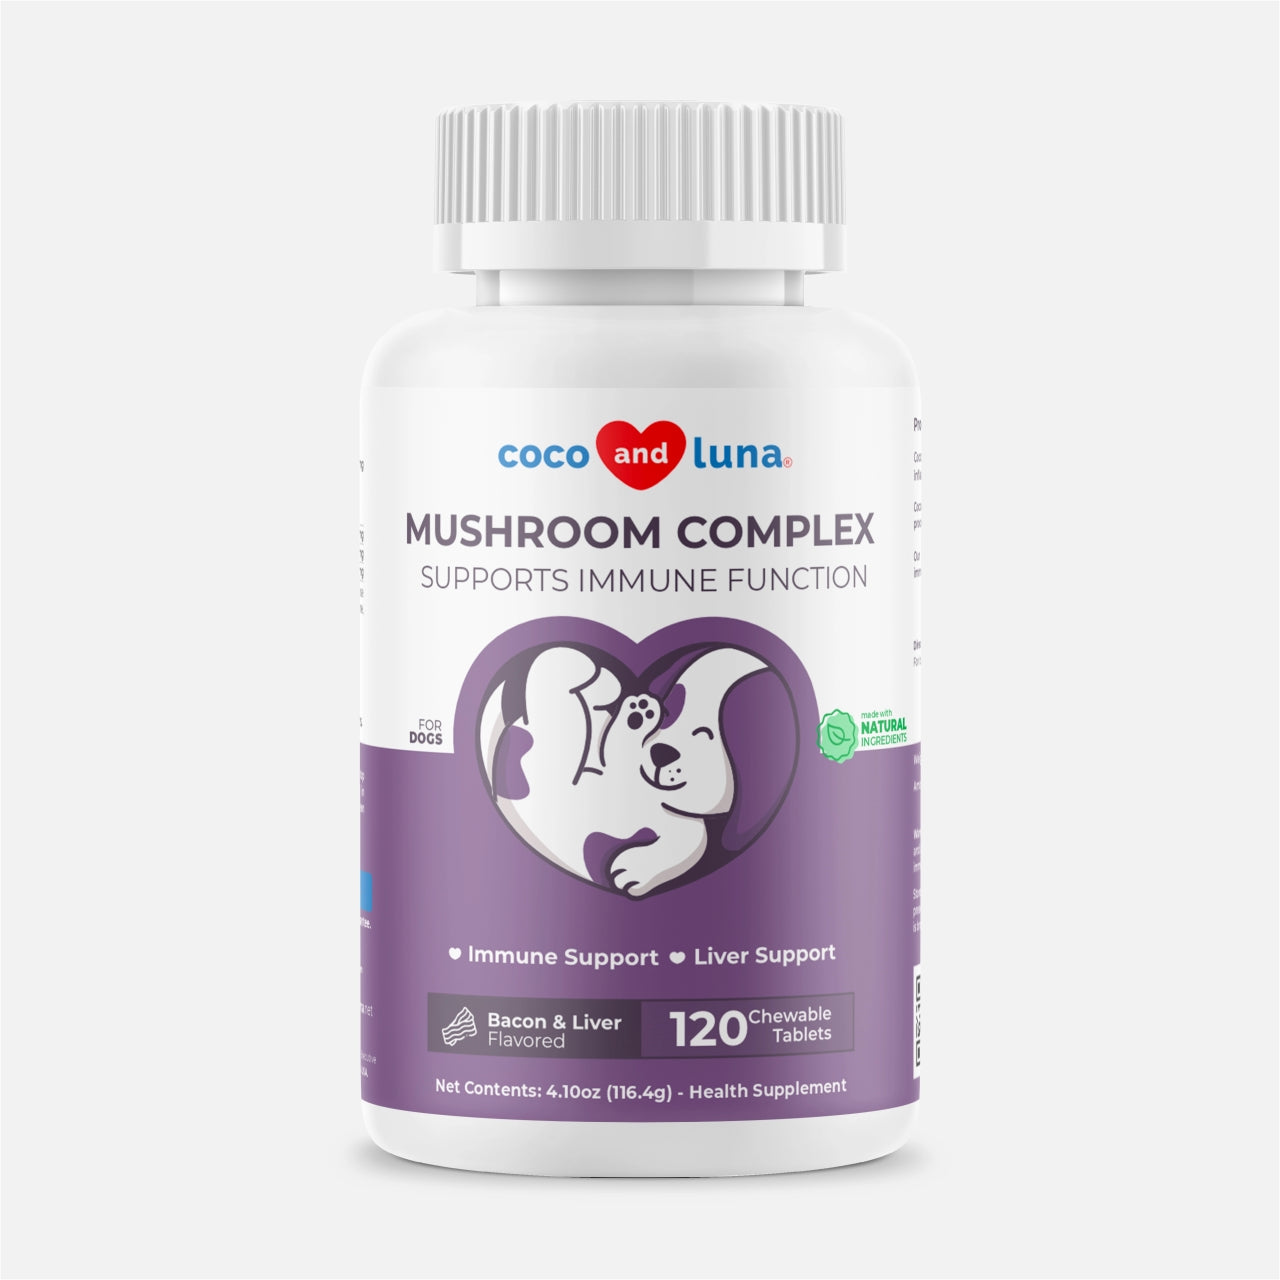 Mushroom Complex for Dogs - 120 Chewable Tablets - Coco and Luna